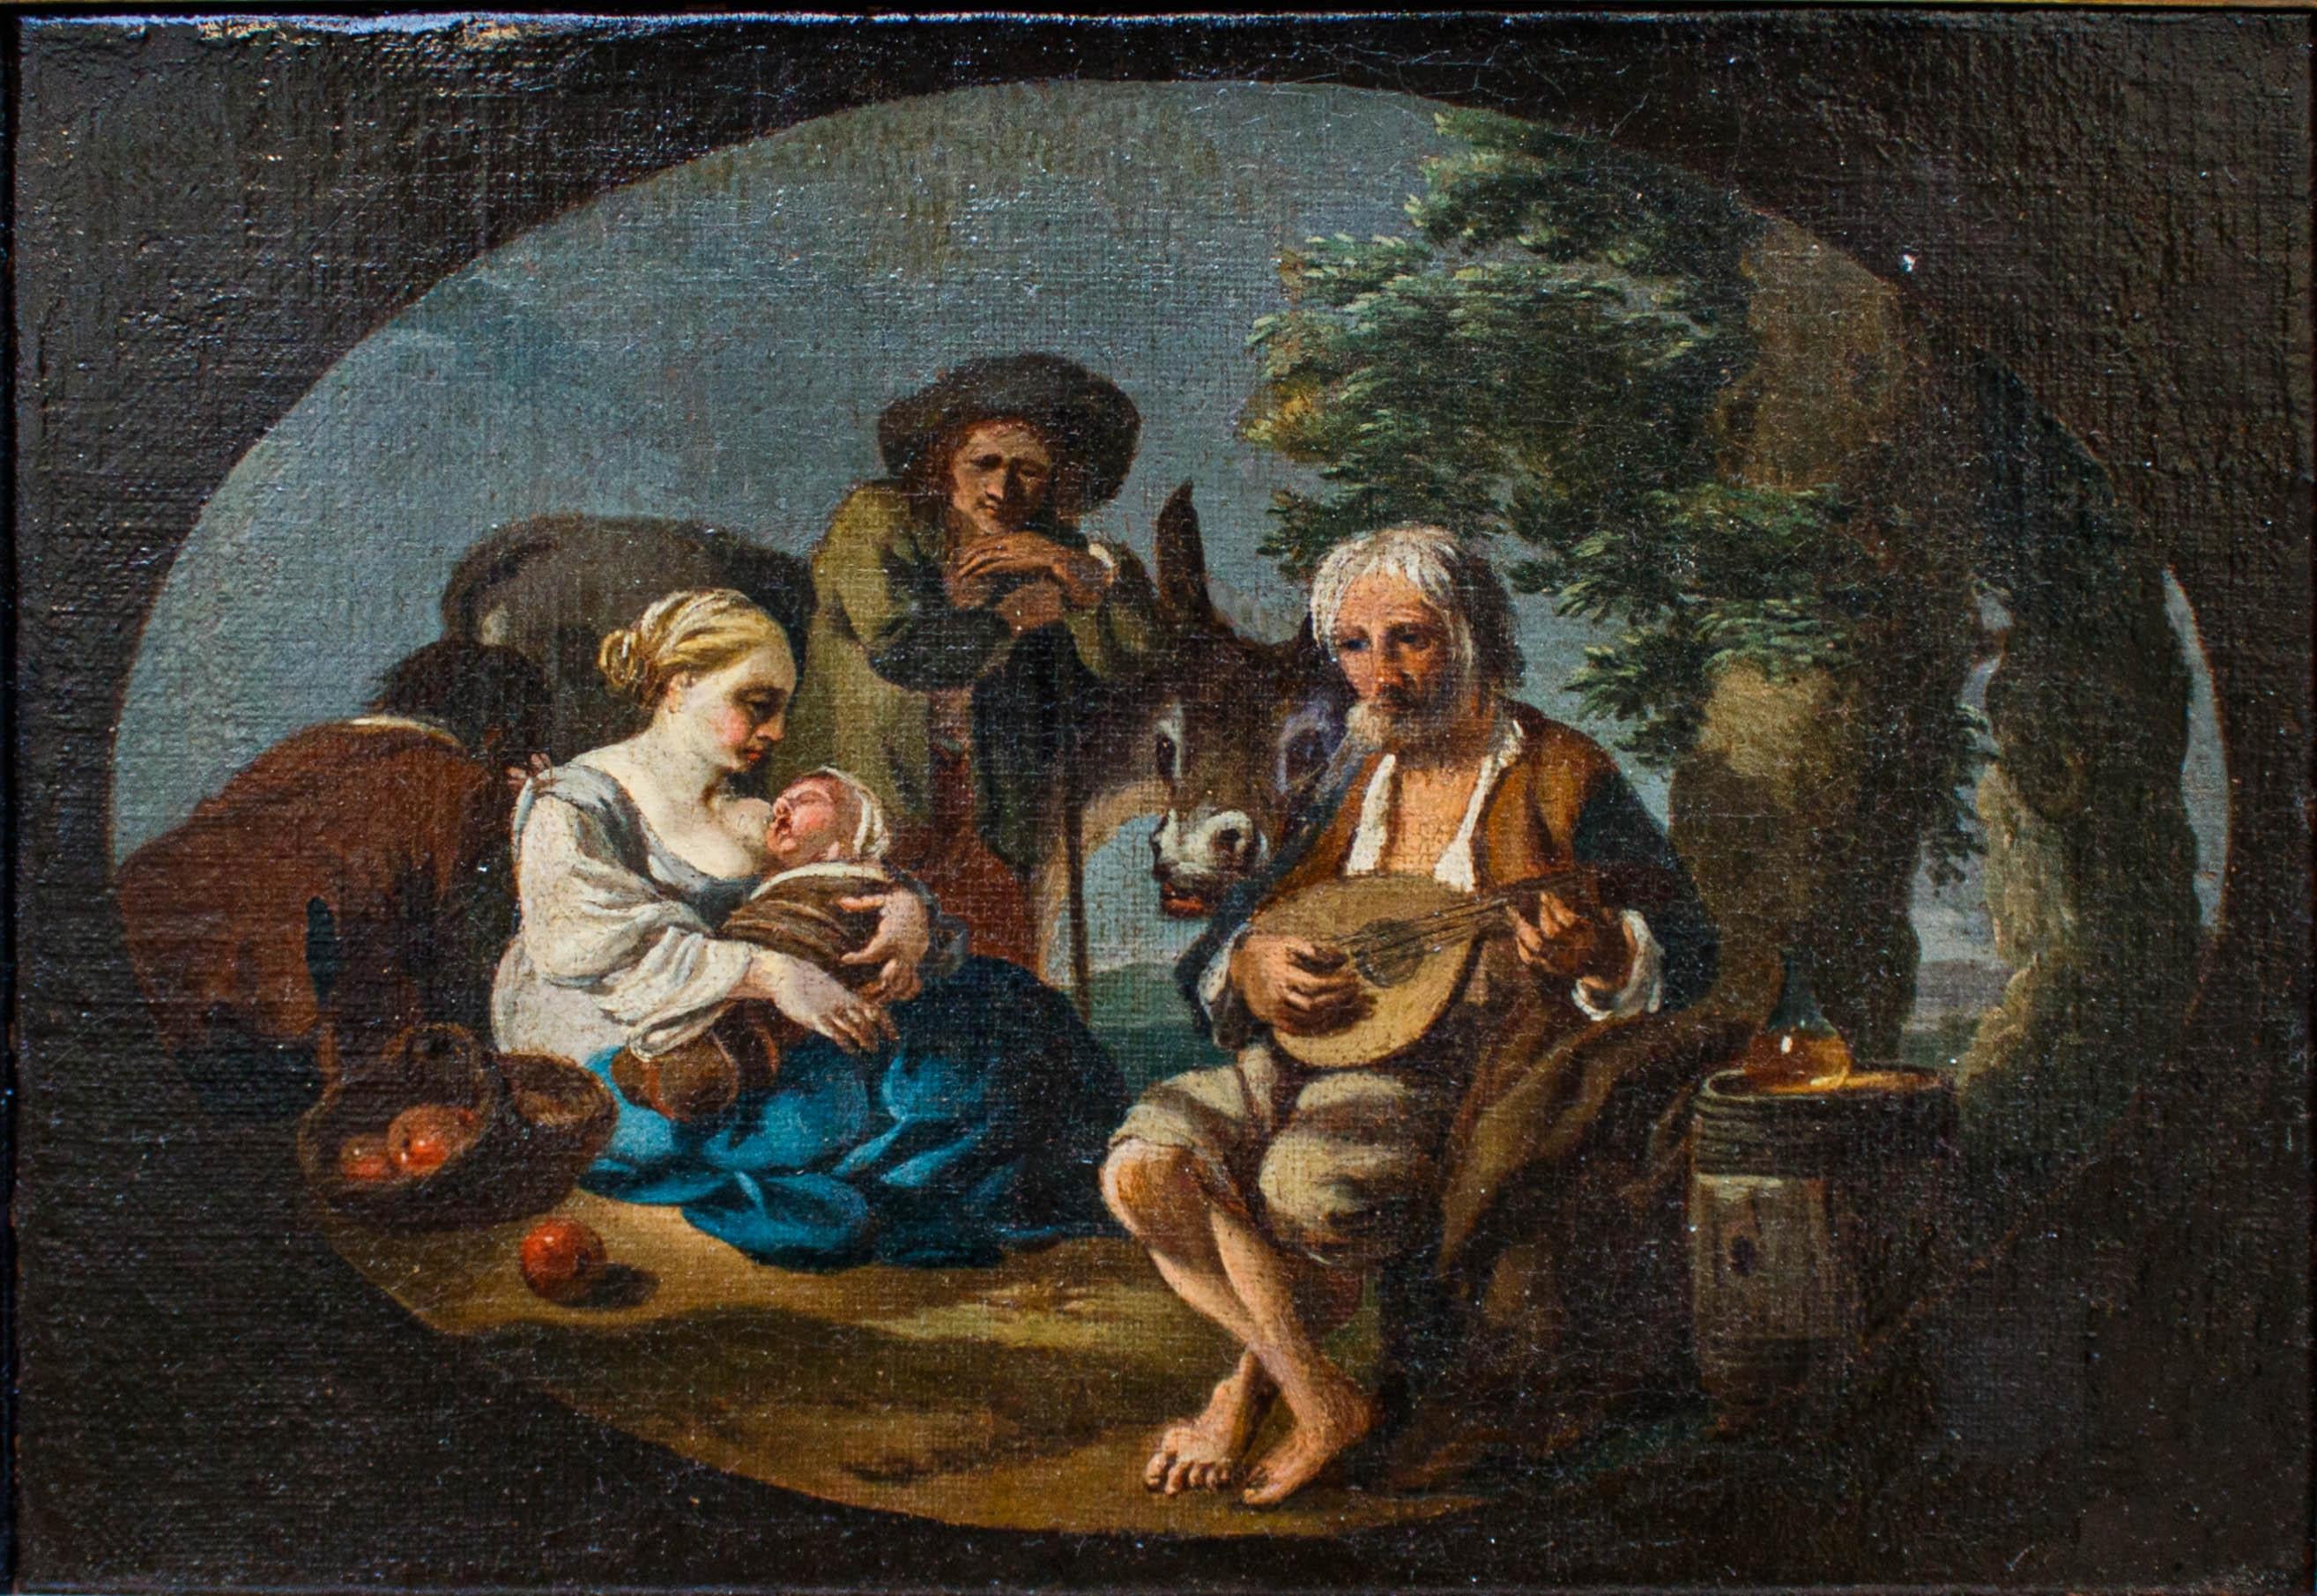 Paolo Monaldi (Rome, 1710 - after 1779), attr.

Genre scene

Oil on canvas, 34 x 25 cm

With frame, 36 x 46 cm

The canvas describes a moment of rest taken from the rural world: the strings of a lute plucked by an elderly man in the